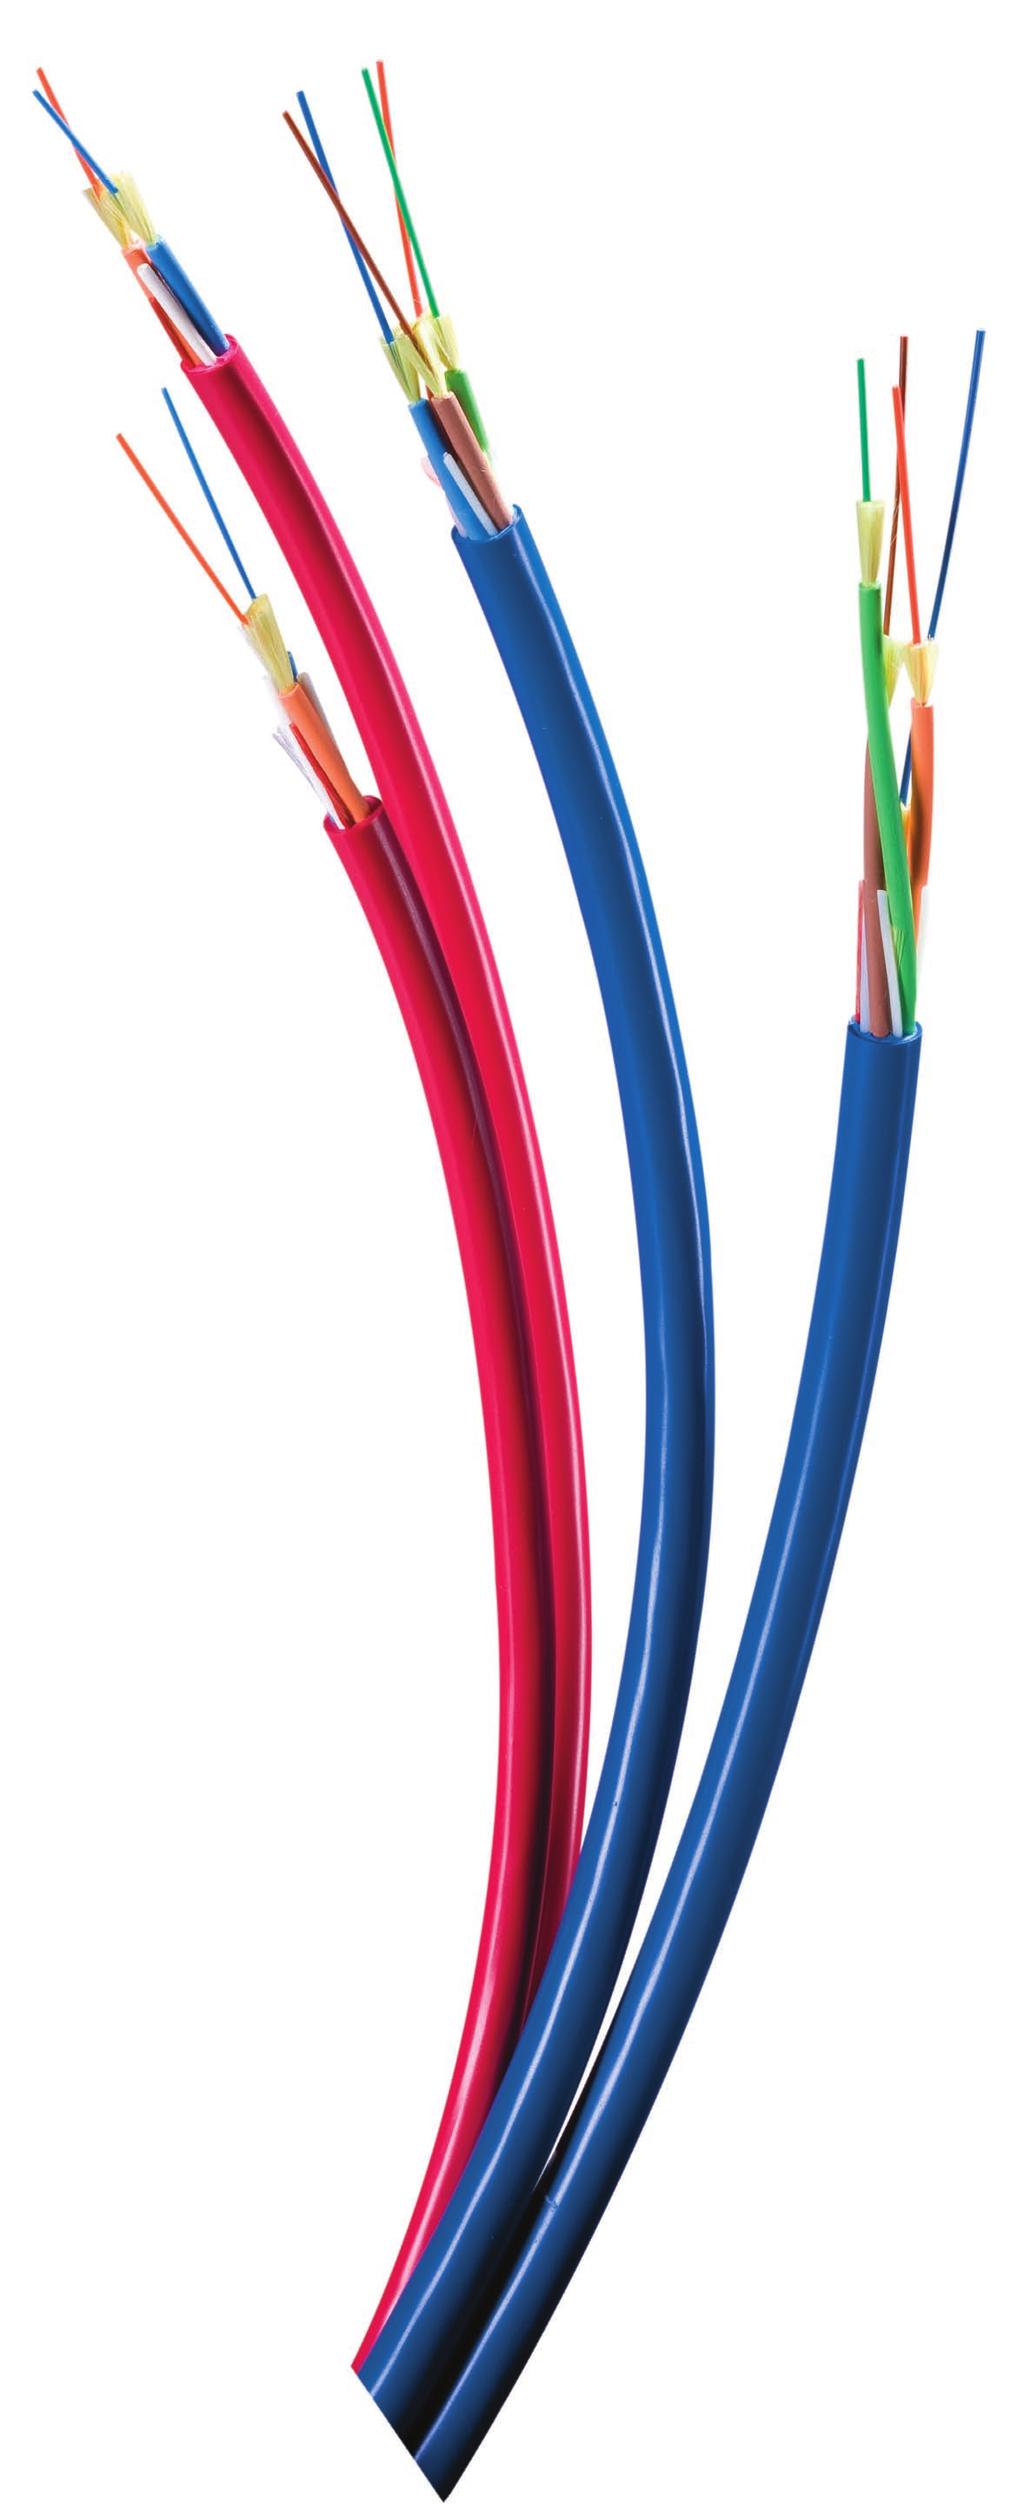 Tight-buffered construction industry solutions: Mining MS 3 Tight-buffered Construction is the Clear Advantage Tight-buffered fiber optic cables from Optical Cable Corporation incorporate the